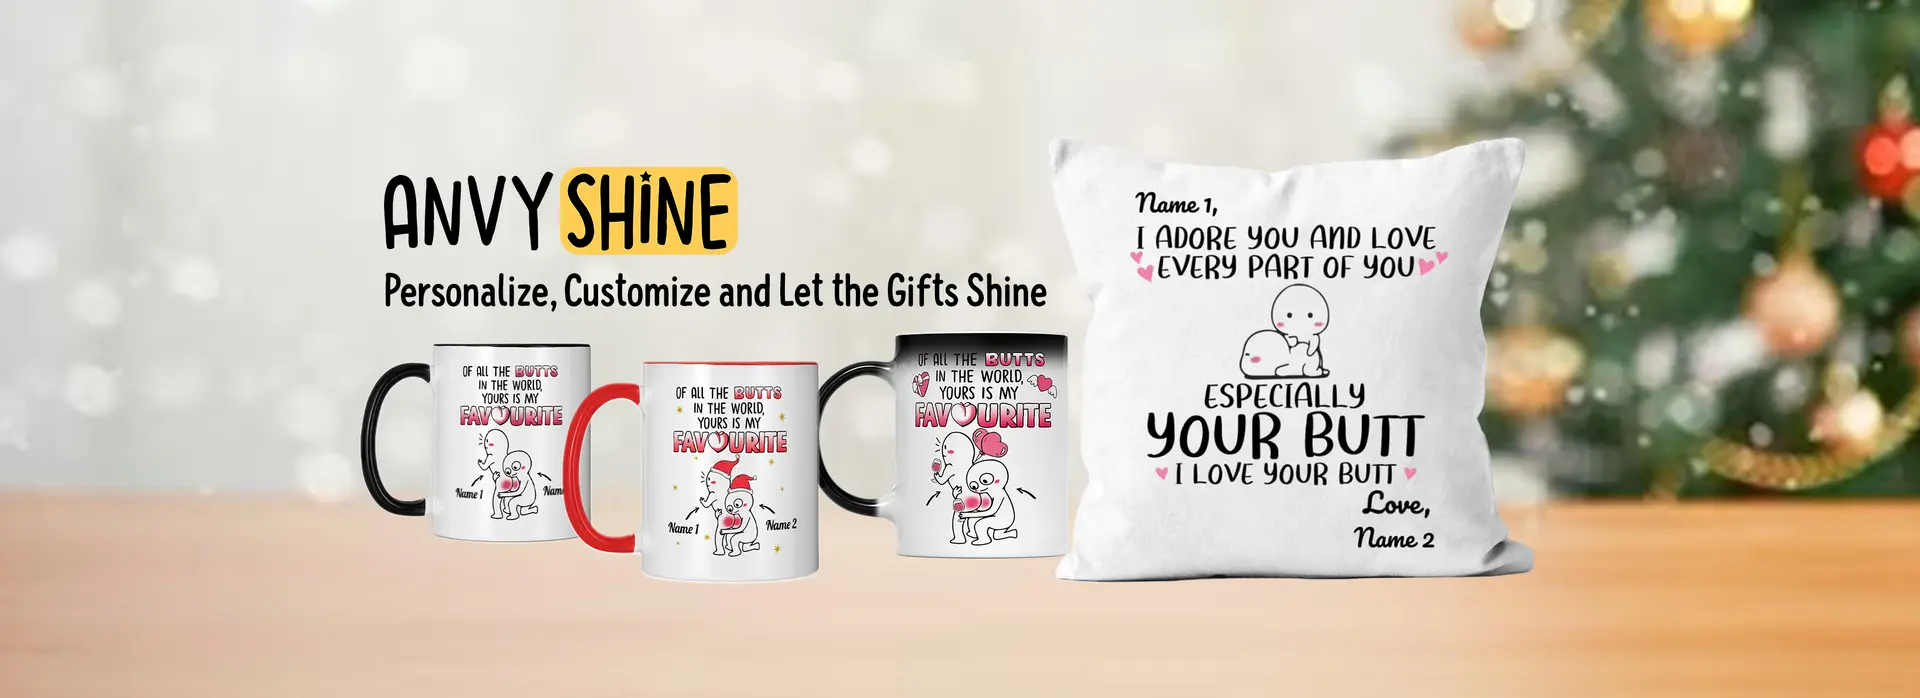 Banner for Anvyshine - Personalized Gifts